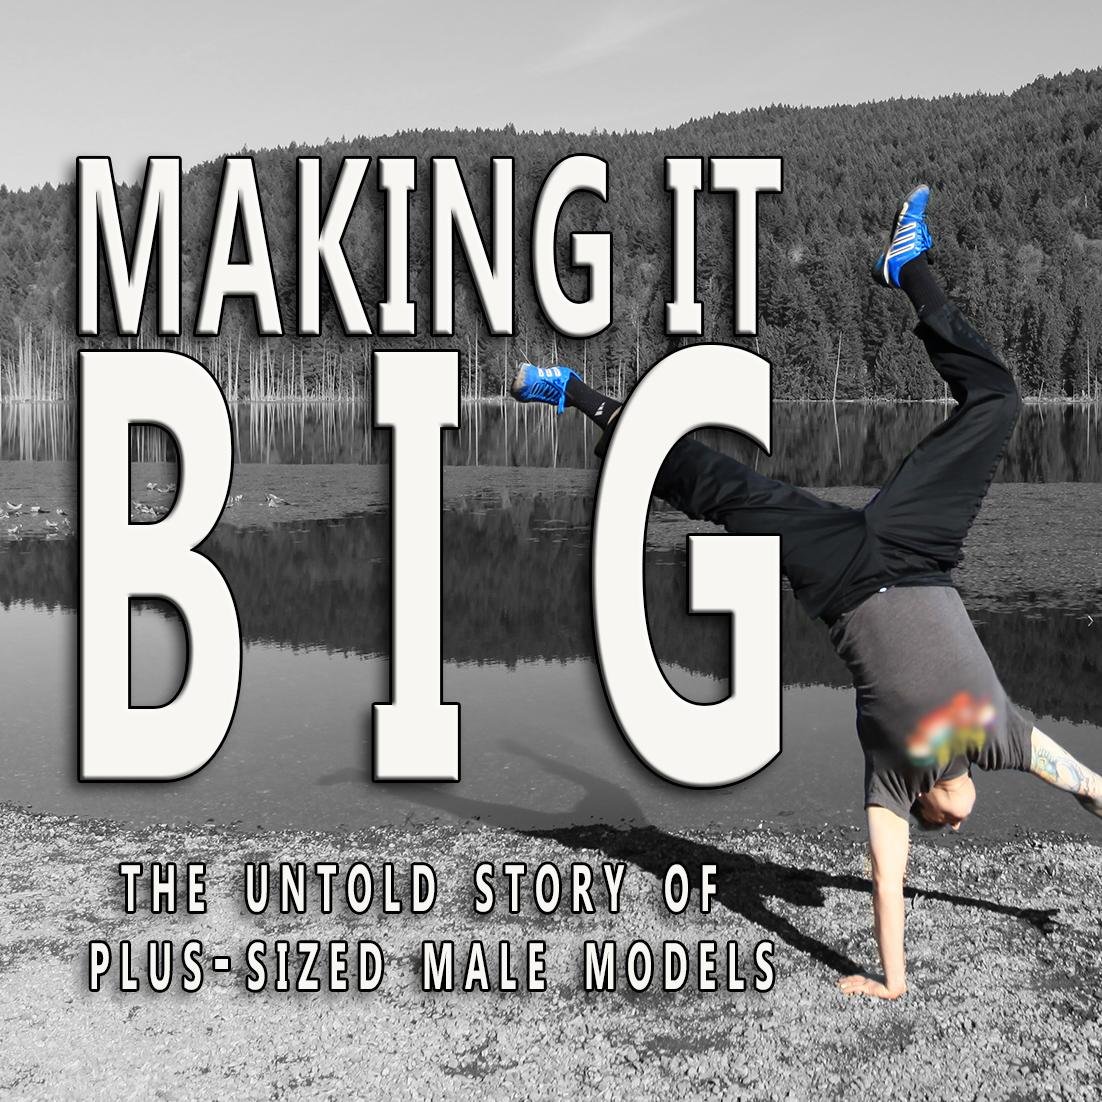 Making It BIG is a Vancouver-based comedy which takes a light-hearted look at the little-known world of plus-sized male modelling.  TV Pilot coming soon!